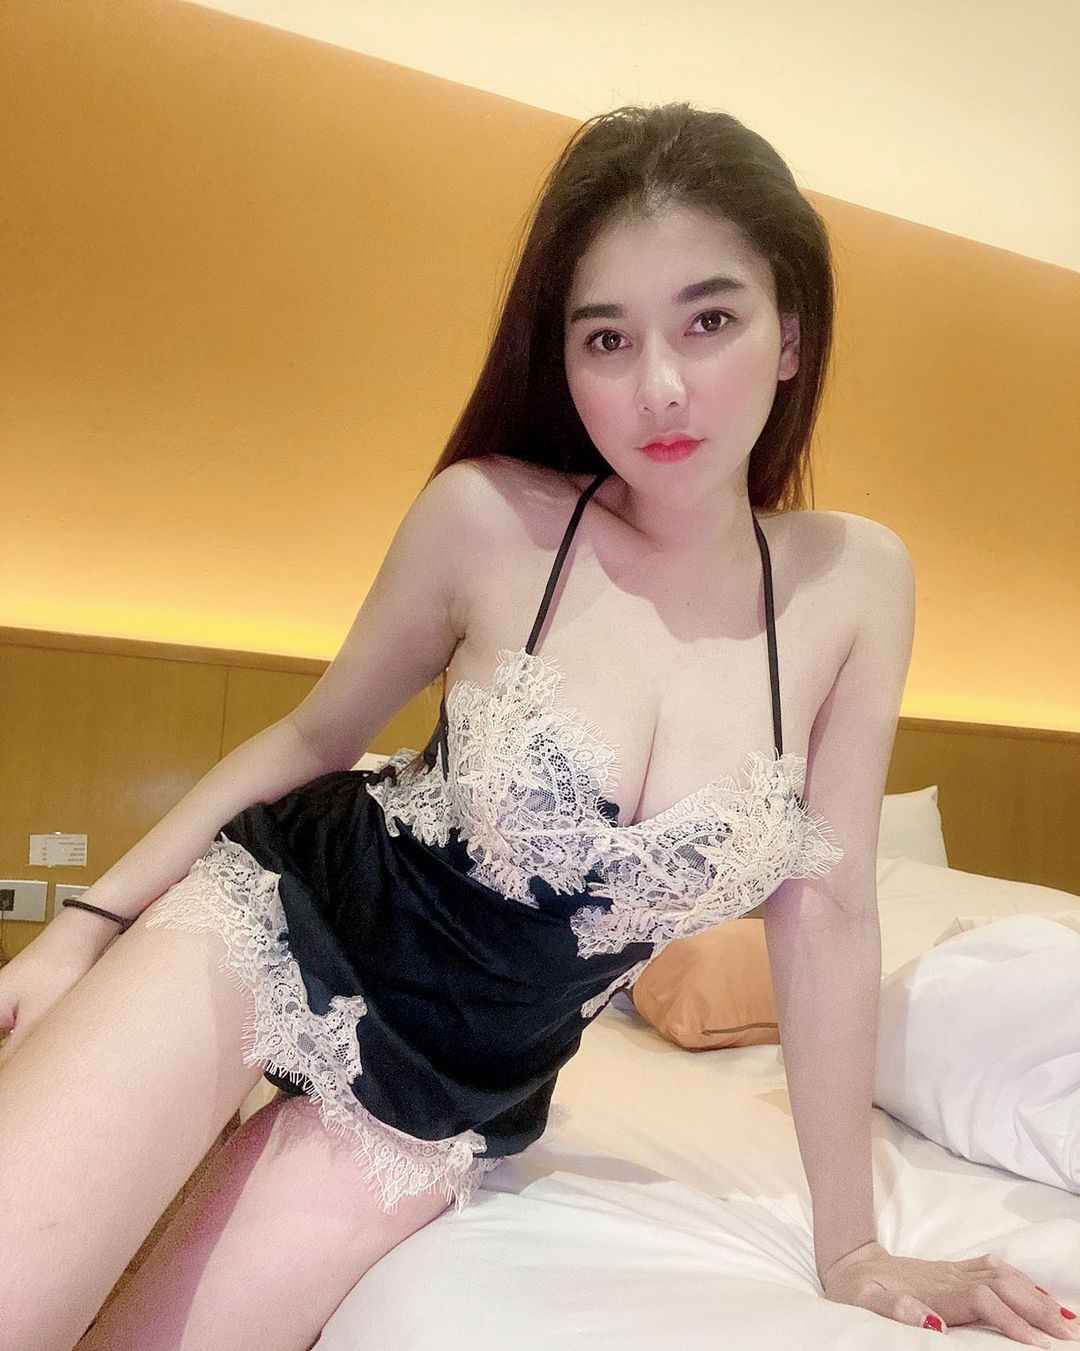 Seductive call girl in KL for your pleasure